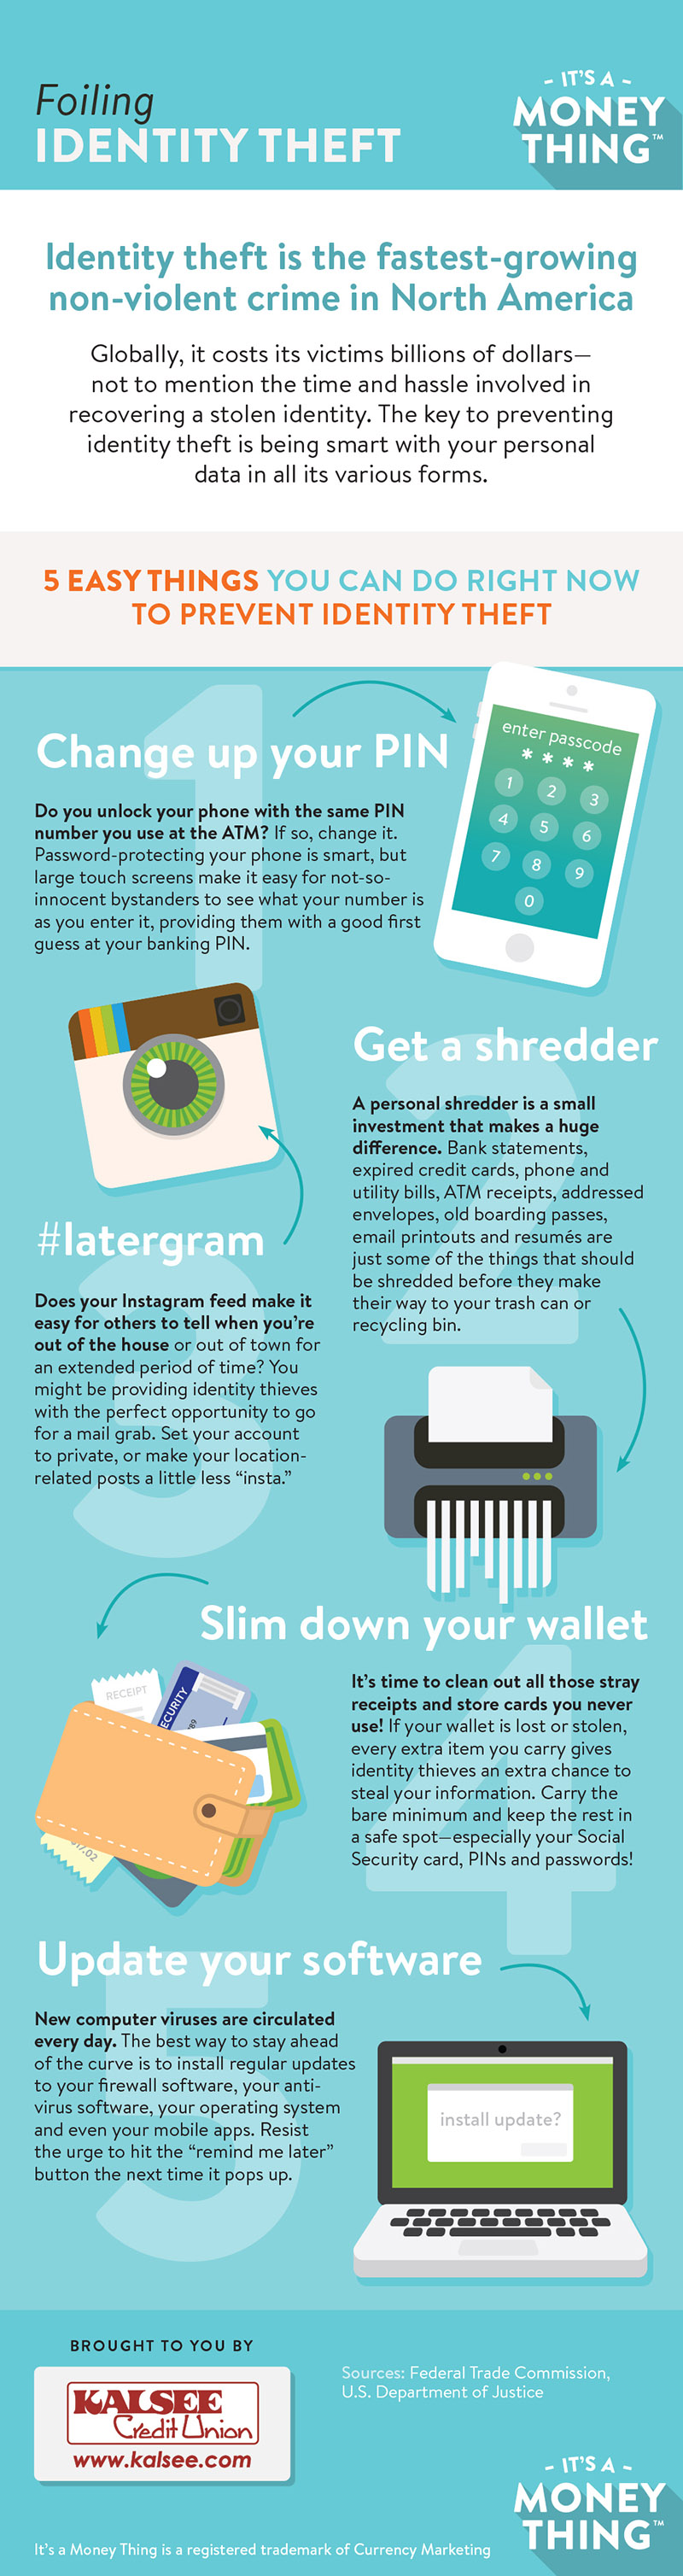 foiling identity theft infographic, click for transcription